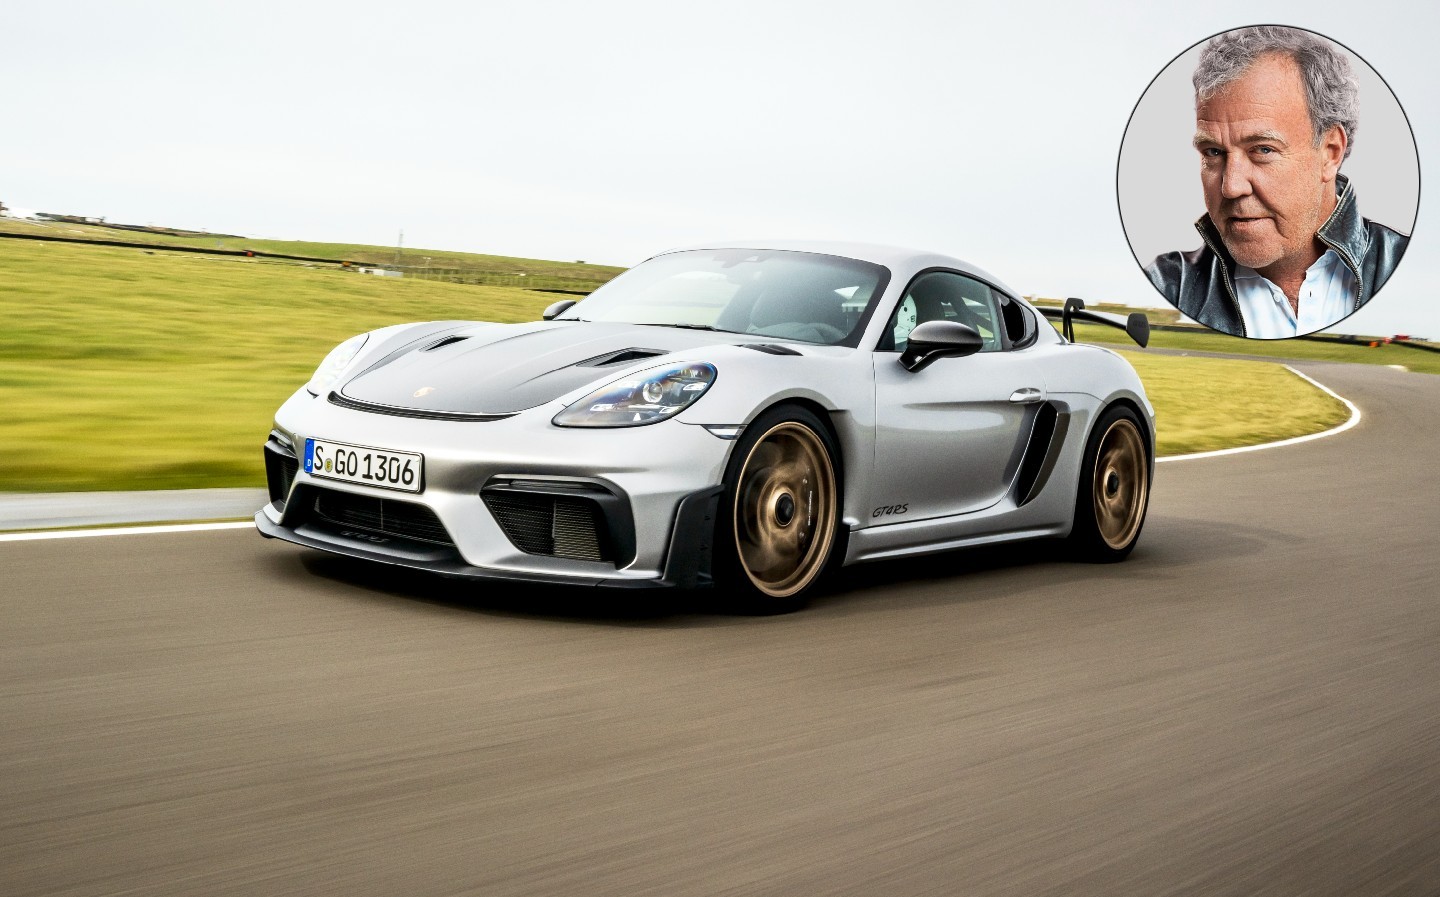 Clarkson says everyone loves the Porsche Cayman GT4 RS because F1 Drive to  Survive has turned them into petrolheads